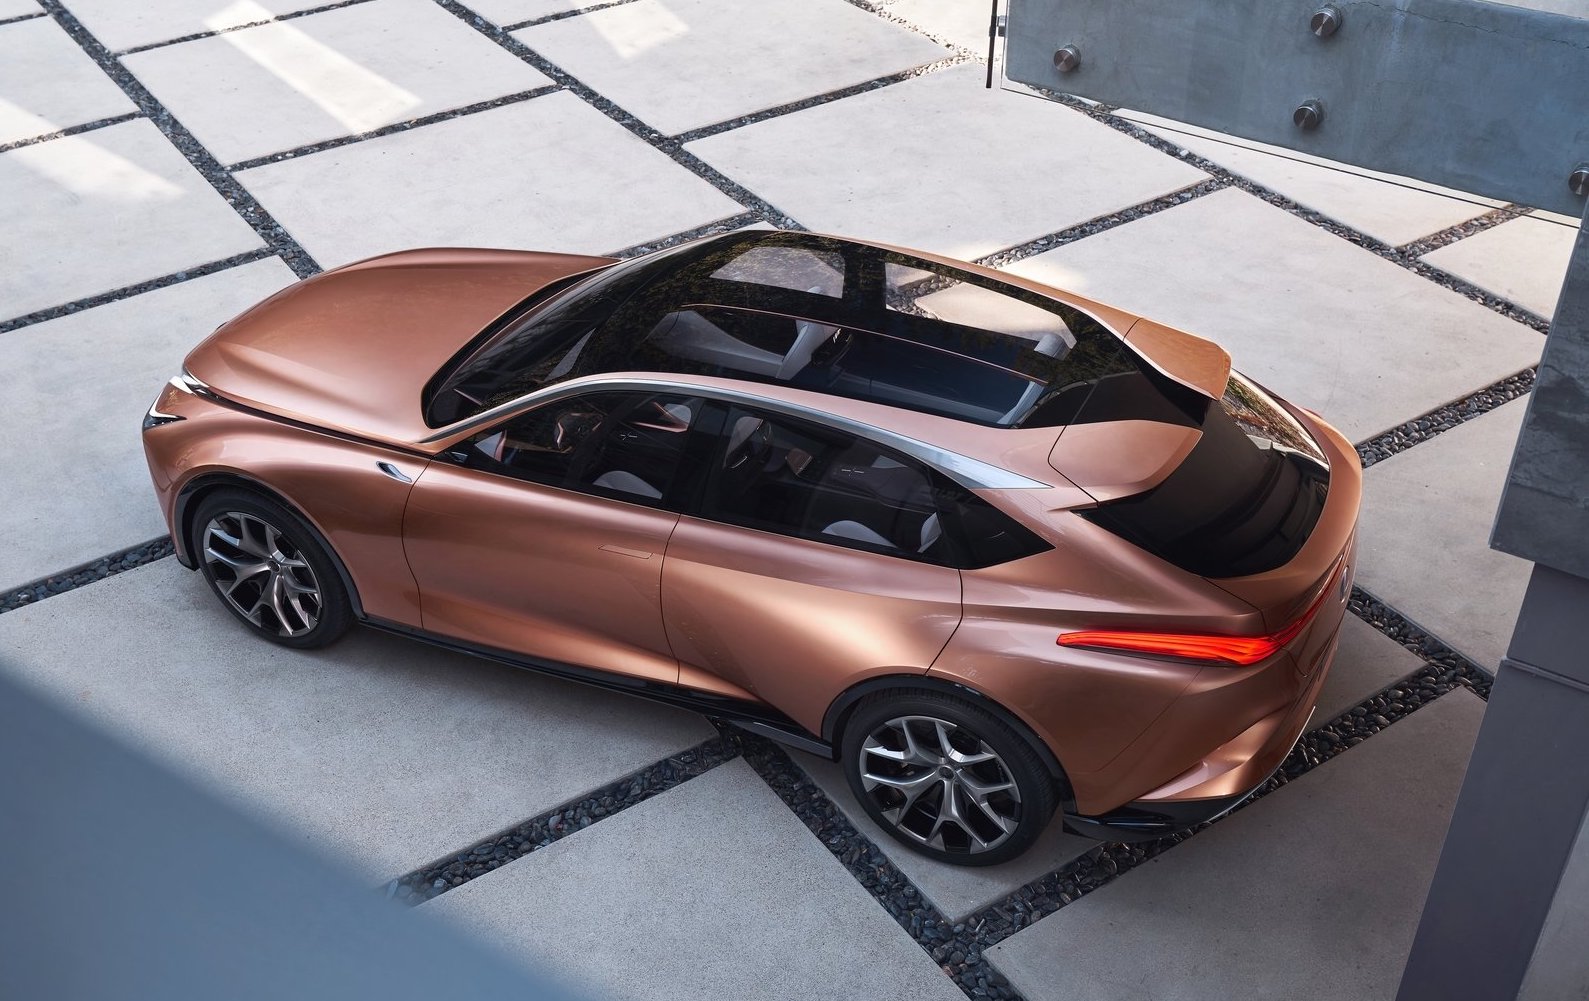 Lexus LF1 Limitless concept hints at flagship crossover